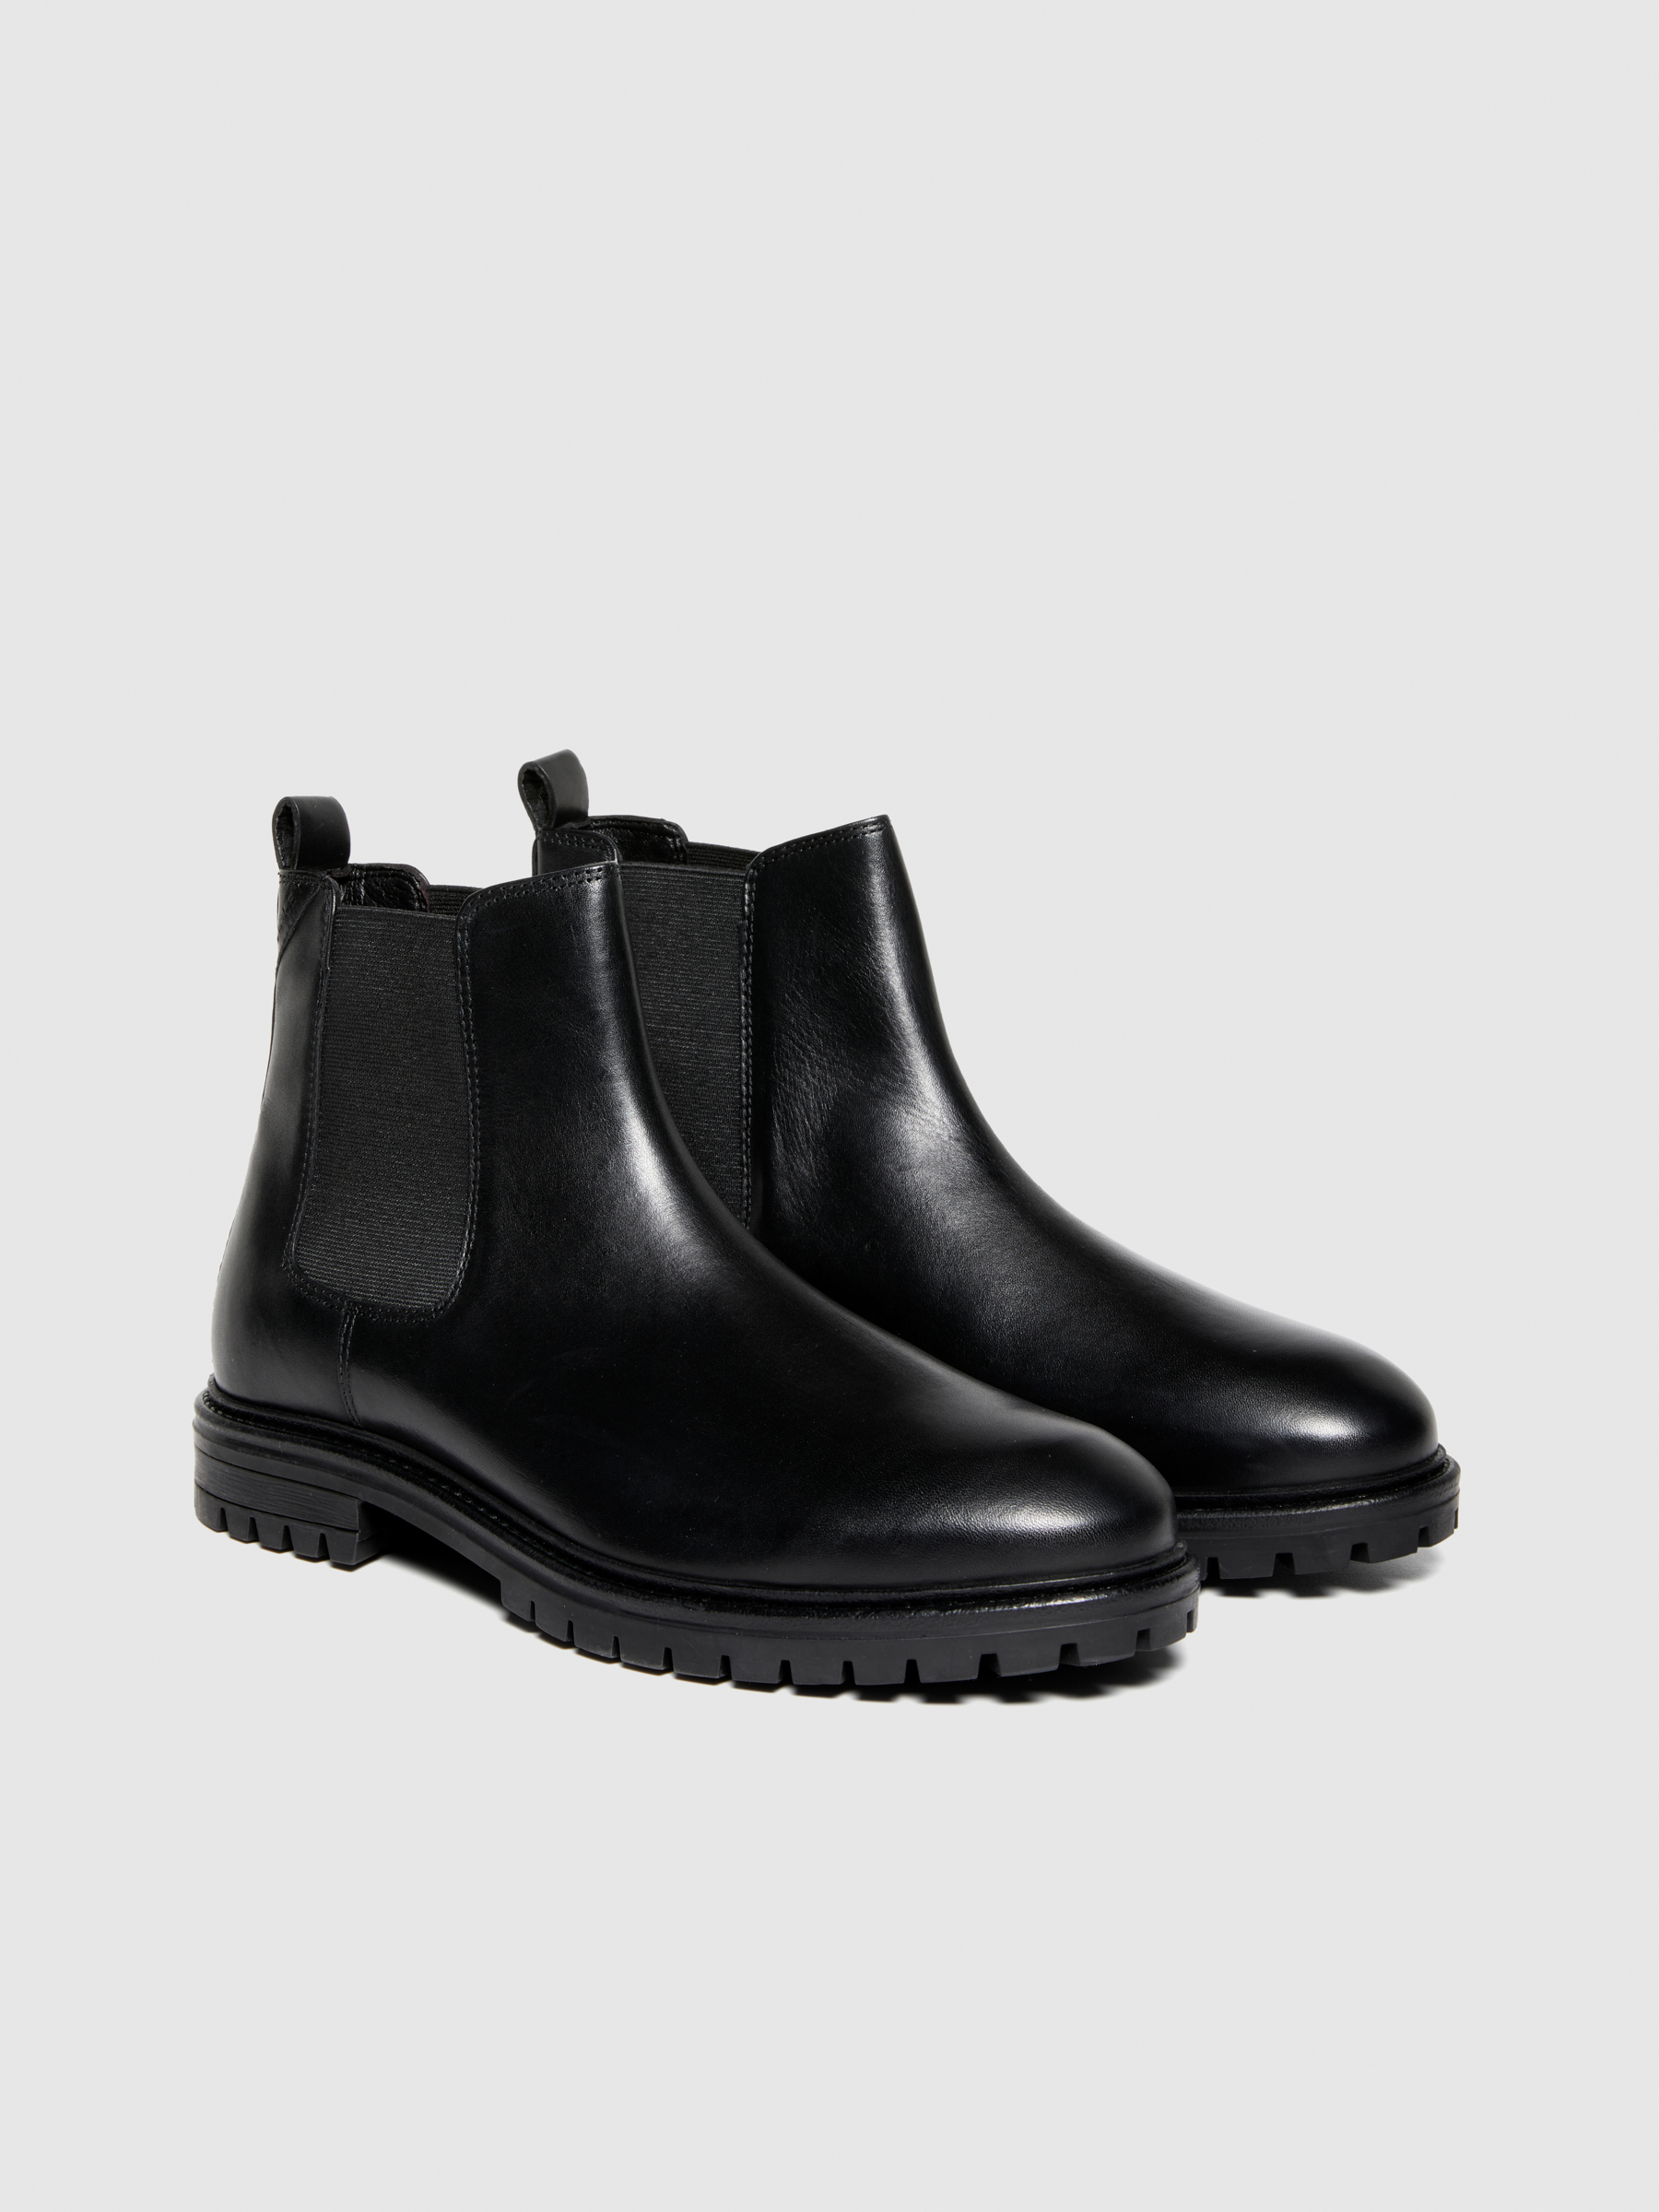 Sisley - Leather Chelsea Boots, Man, Black, Size: 45